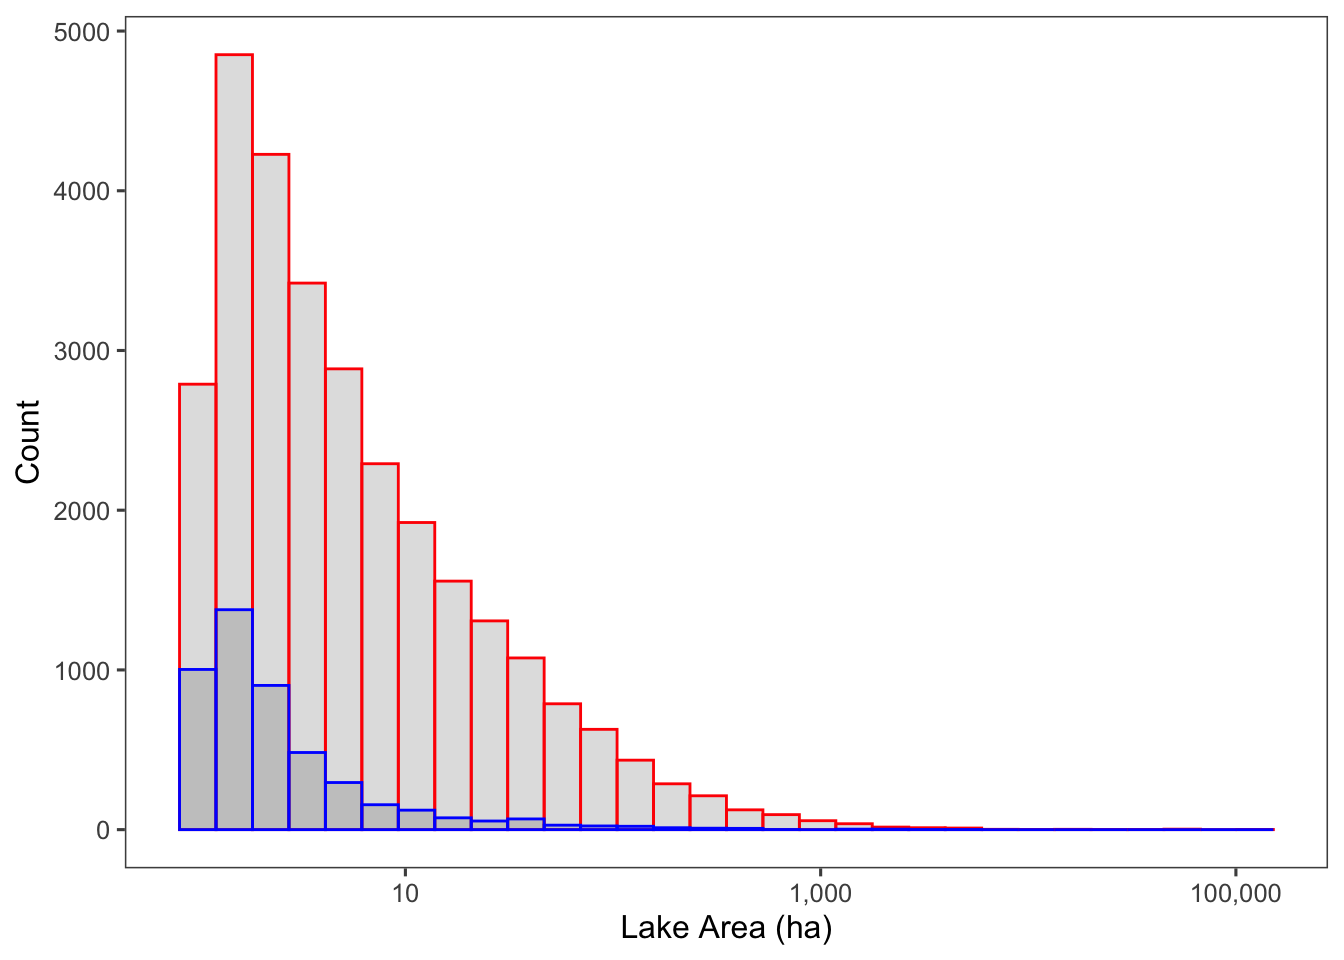 The number of lakes with a given area, in hectares, in Minnesota (red) and Iowa (blue).